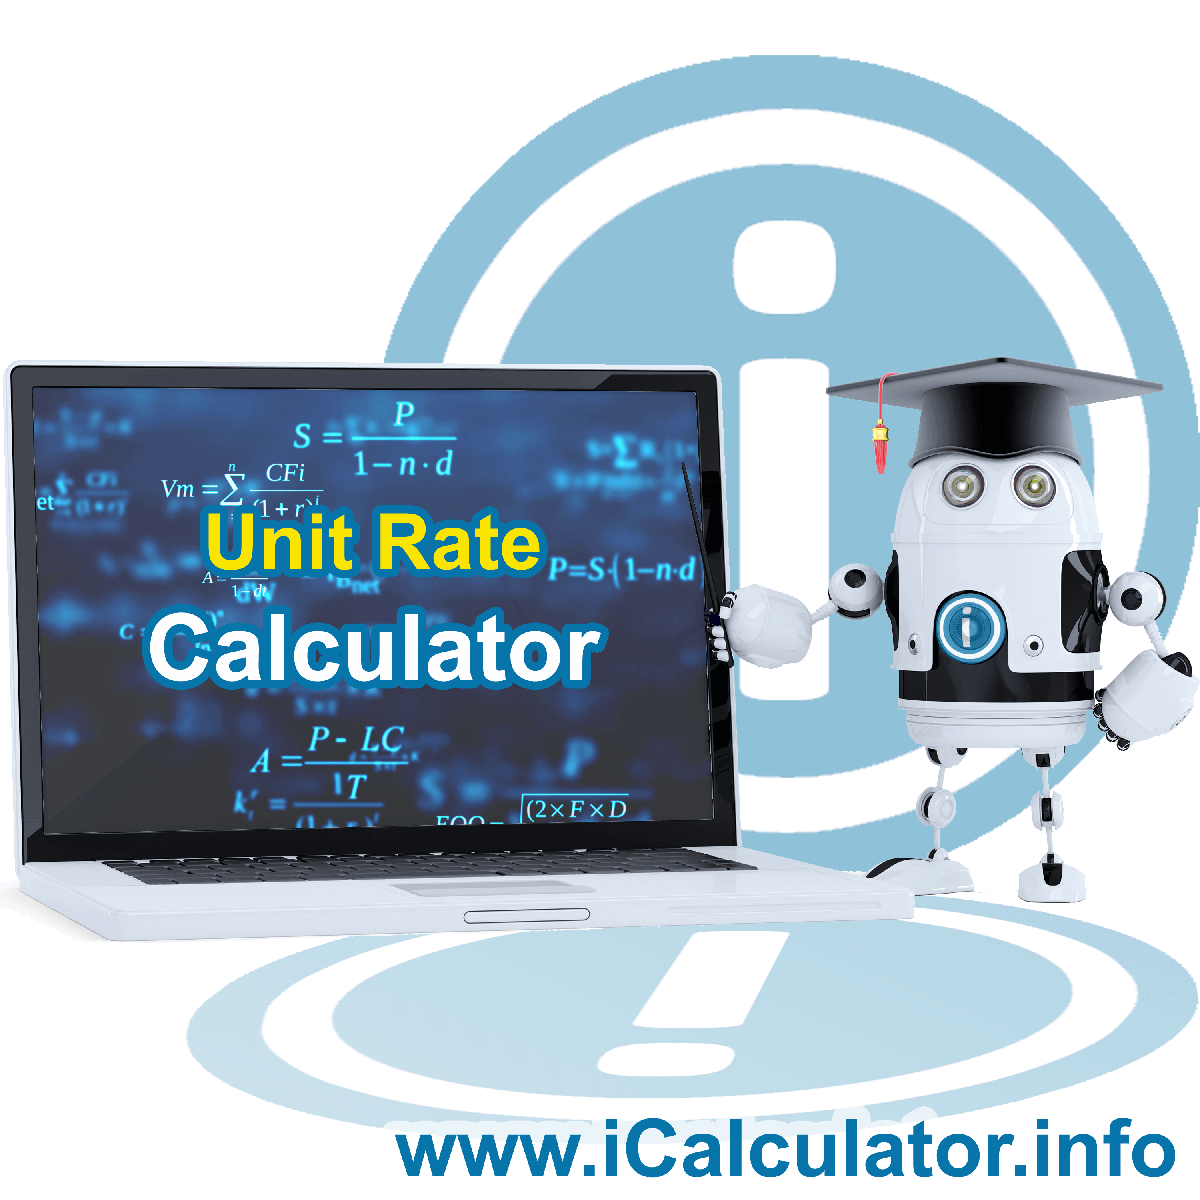 Unit Rate Calculator. This image provides details of how to calculate the unit rate using a calculator and notepad. By using the unit rate formula, the Unit Rate Calculator provides benchmark quantities and assessment of relative value in terms of share